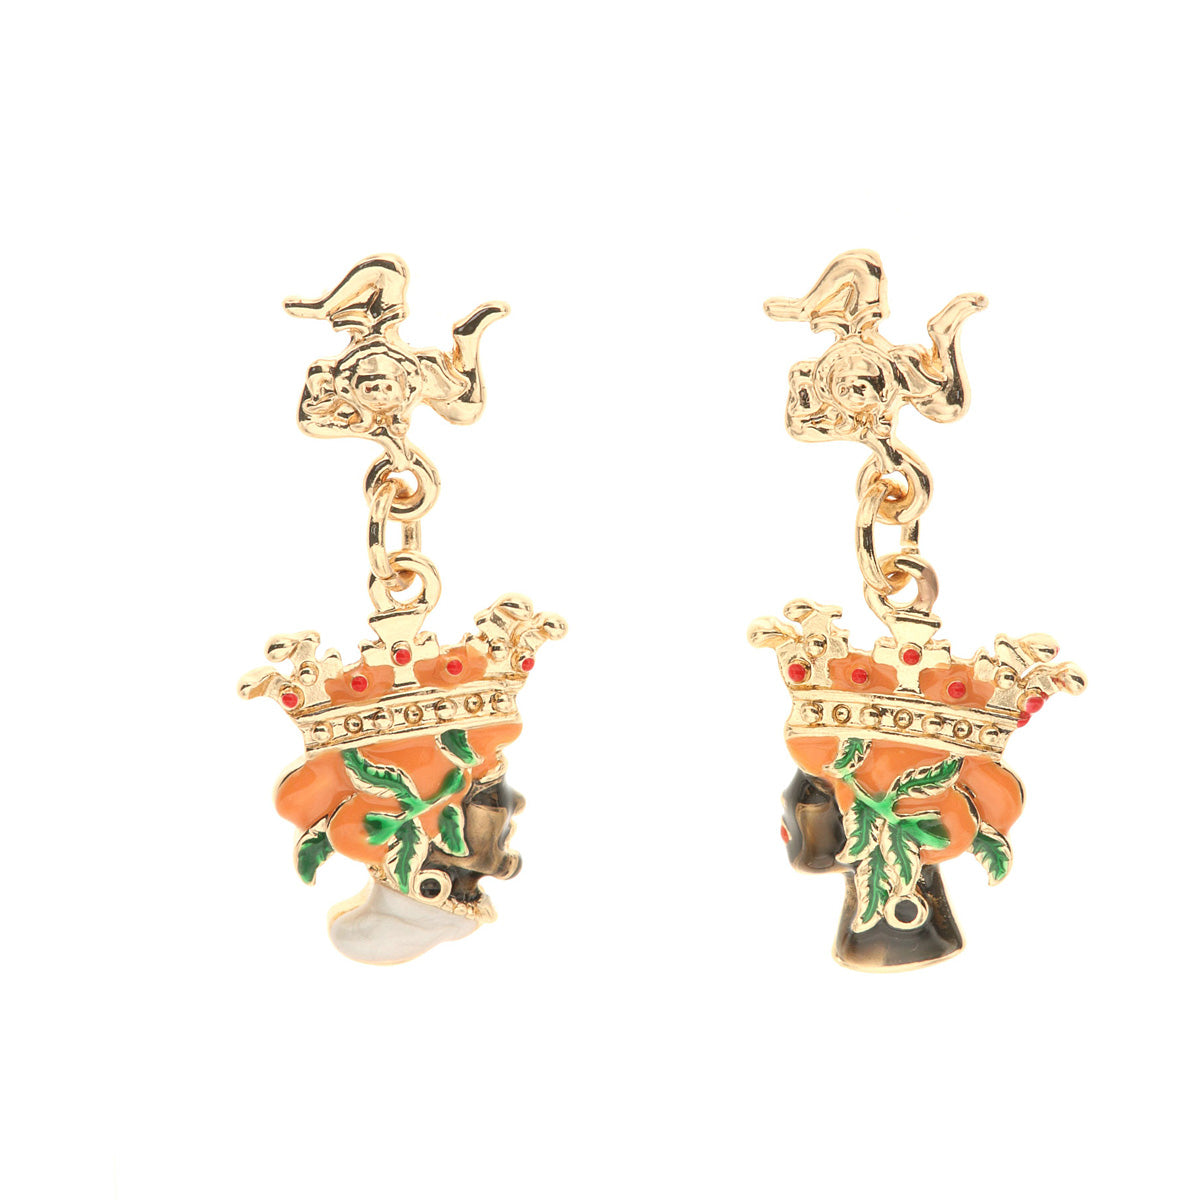 Metal earrings with a symbol of Trinacria and Moro heads embellished with colored glazes